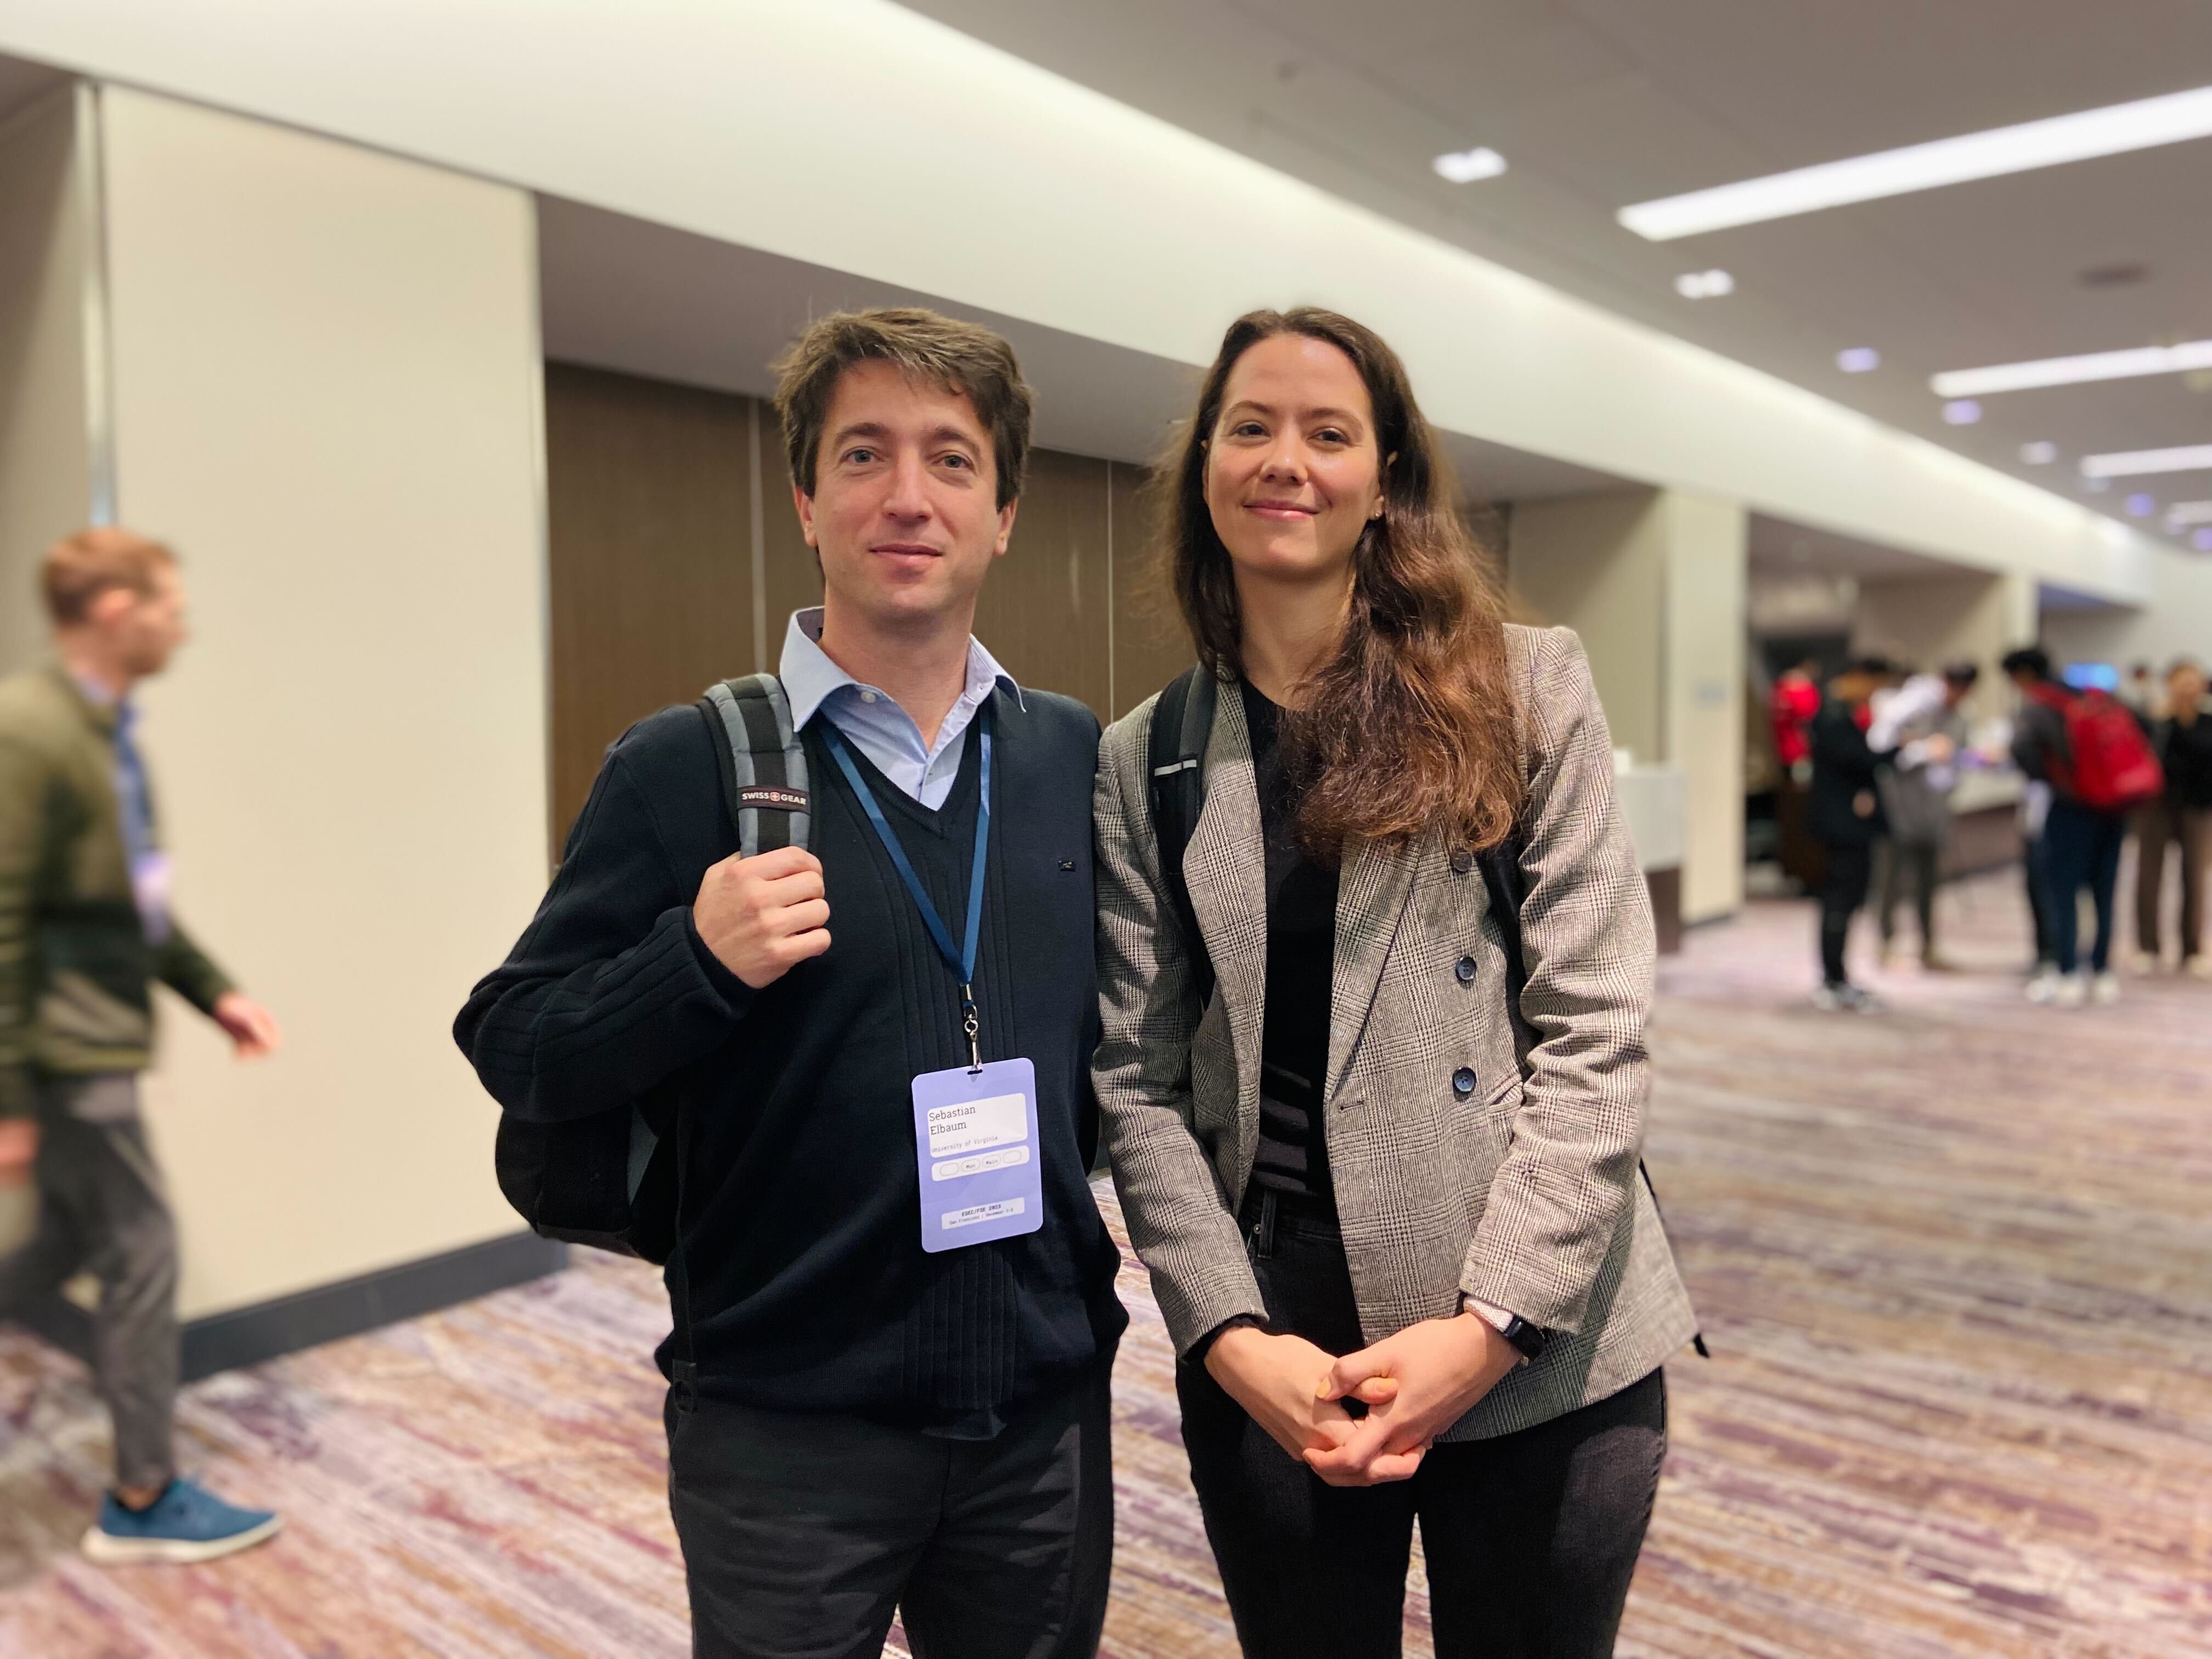 Sebastian and Meriel, organizers of the _SE4SafeML: Dependability and Trustworthiness of Safety-Critical Systems with Machine Learned Components_ workshop, at FSE 2023. SE4SafeML was the highest attended workshop at the conference with 44 attendees.